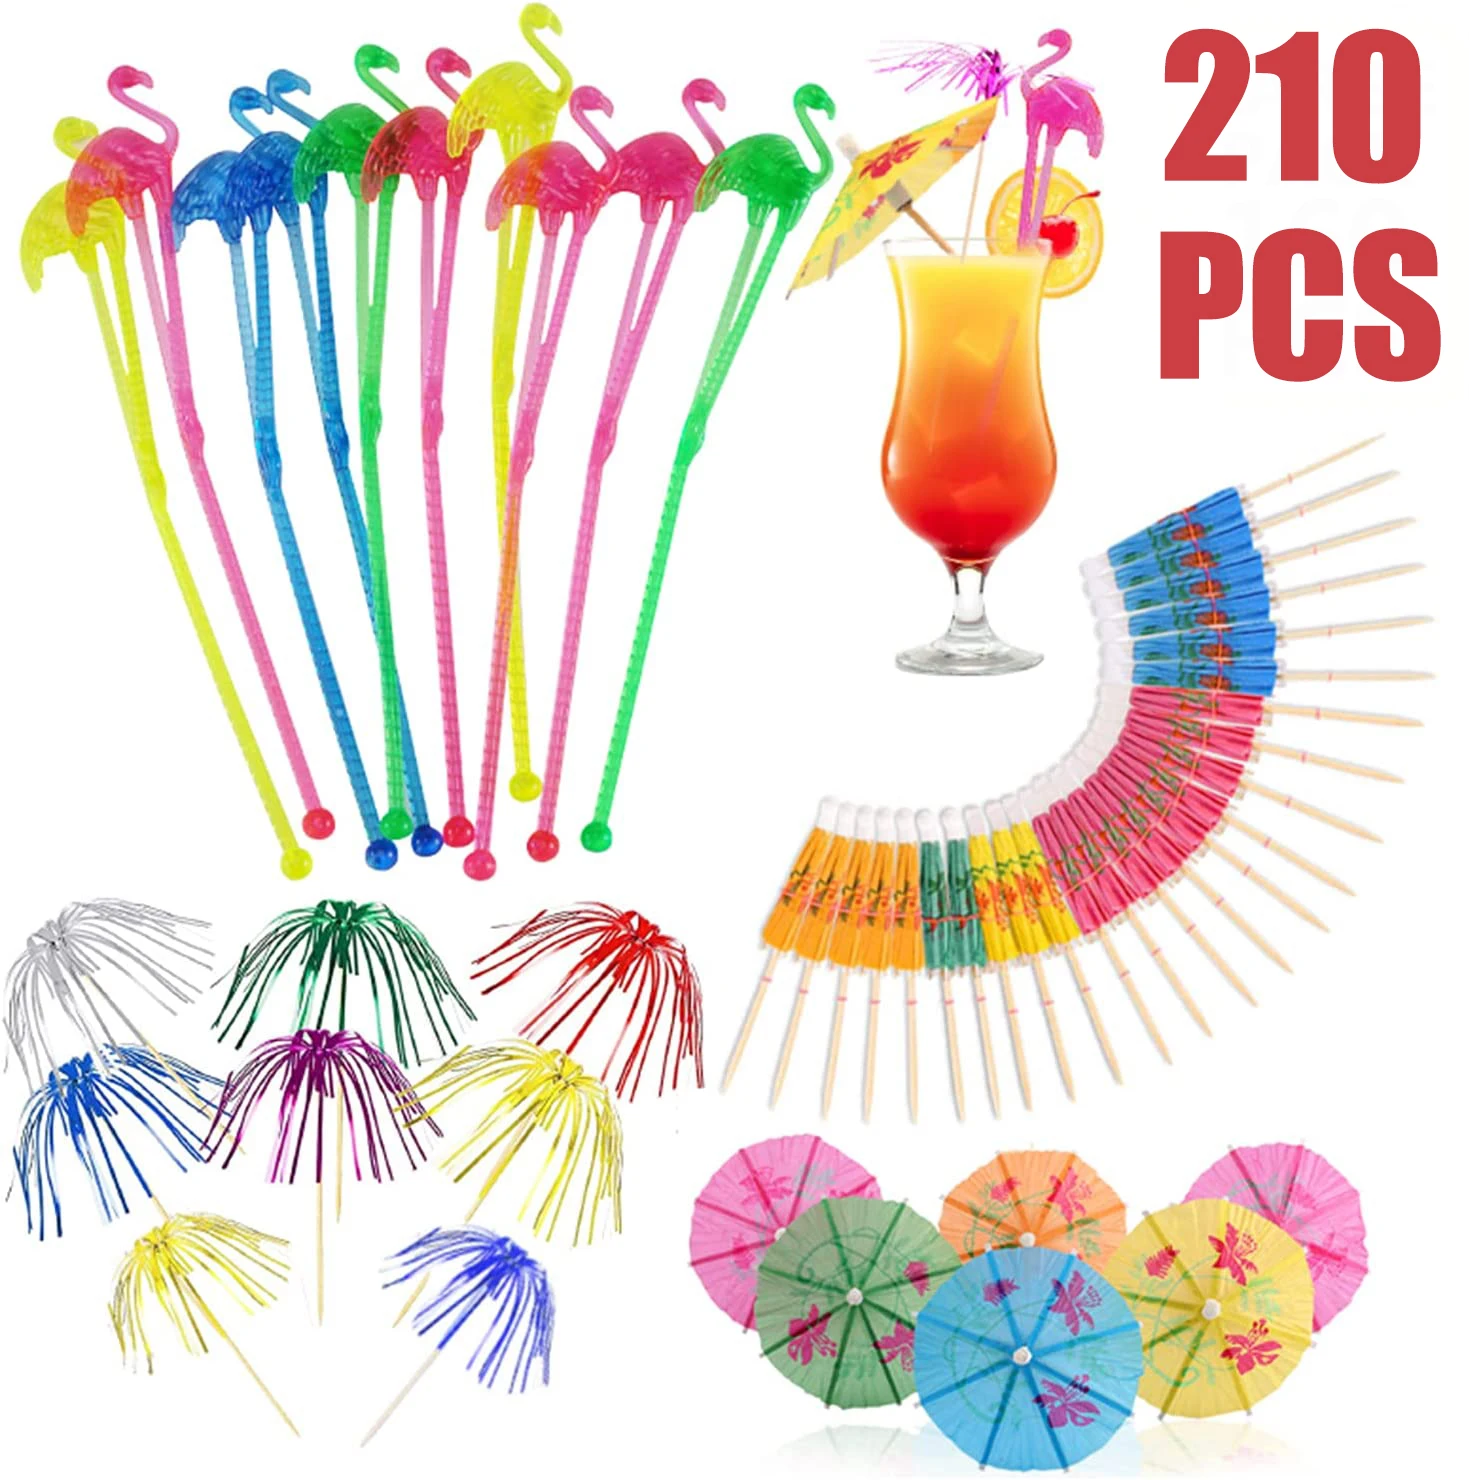 

210Pcs Cocktail Party Decorations Set with Flamingo Cocktail Stirrers Drink Umbrellas for Hawaii Tropical Summer Party Supplies